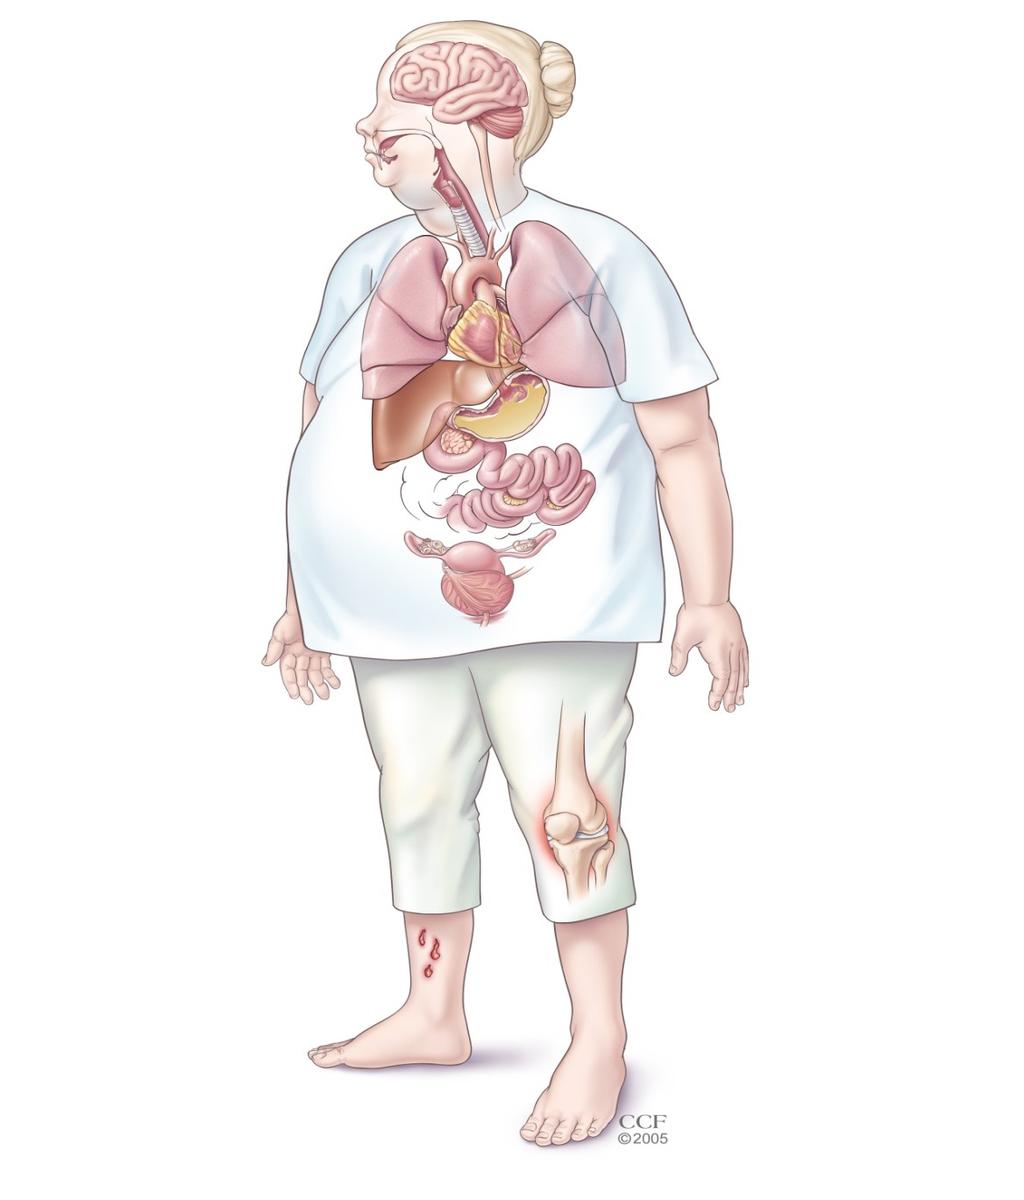 Obesity-related Disease The Harmful Effects of Obesity Migraines Sleep apnea Asthma Increased chance of developing one of these and/or additional diseases: Liver disease